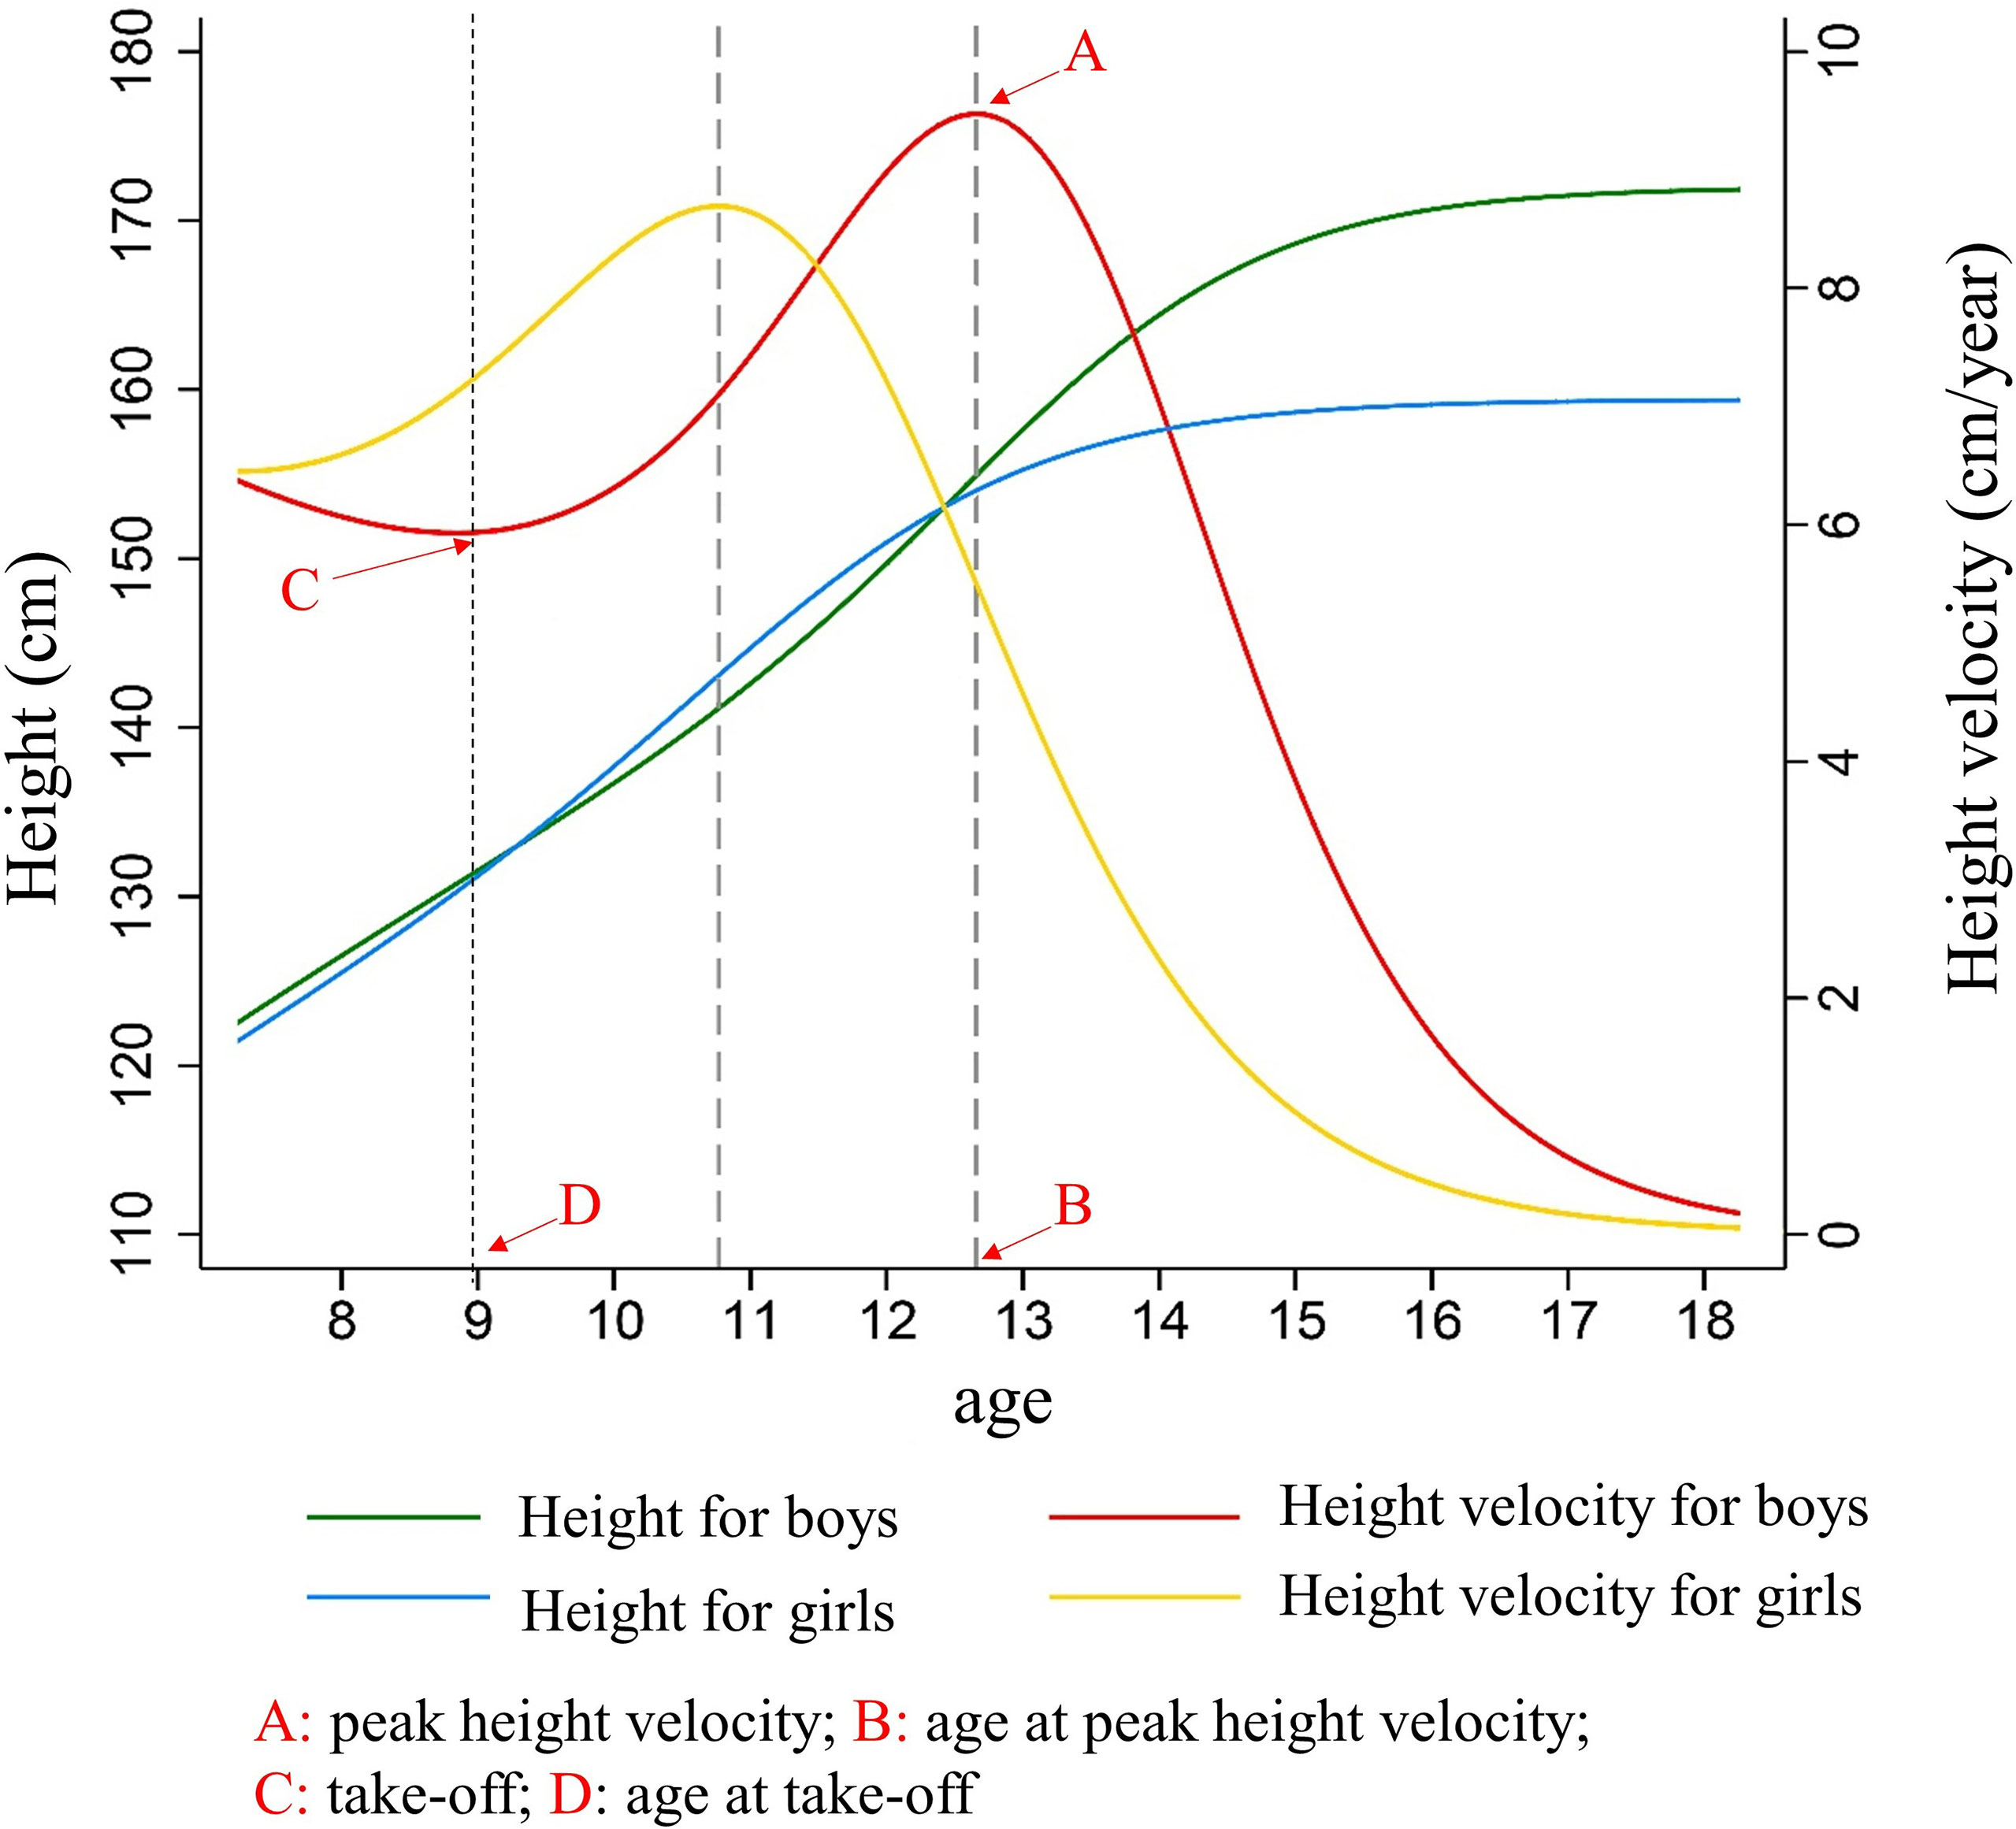 Frontiers  Association between height growth patterns in puberty